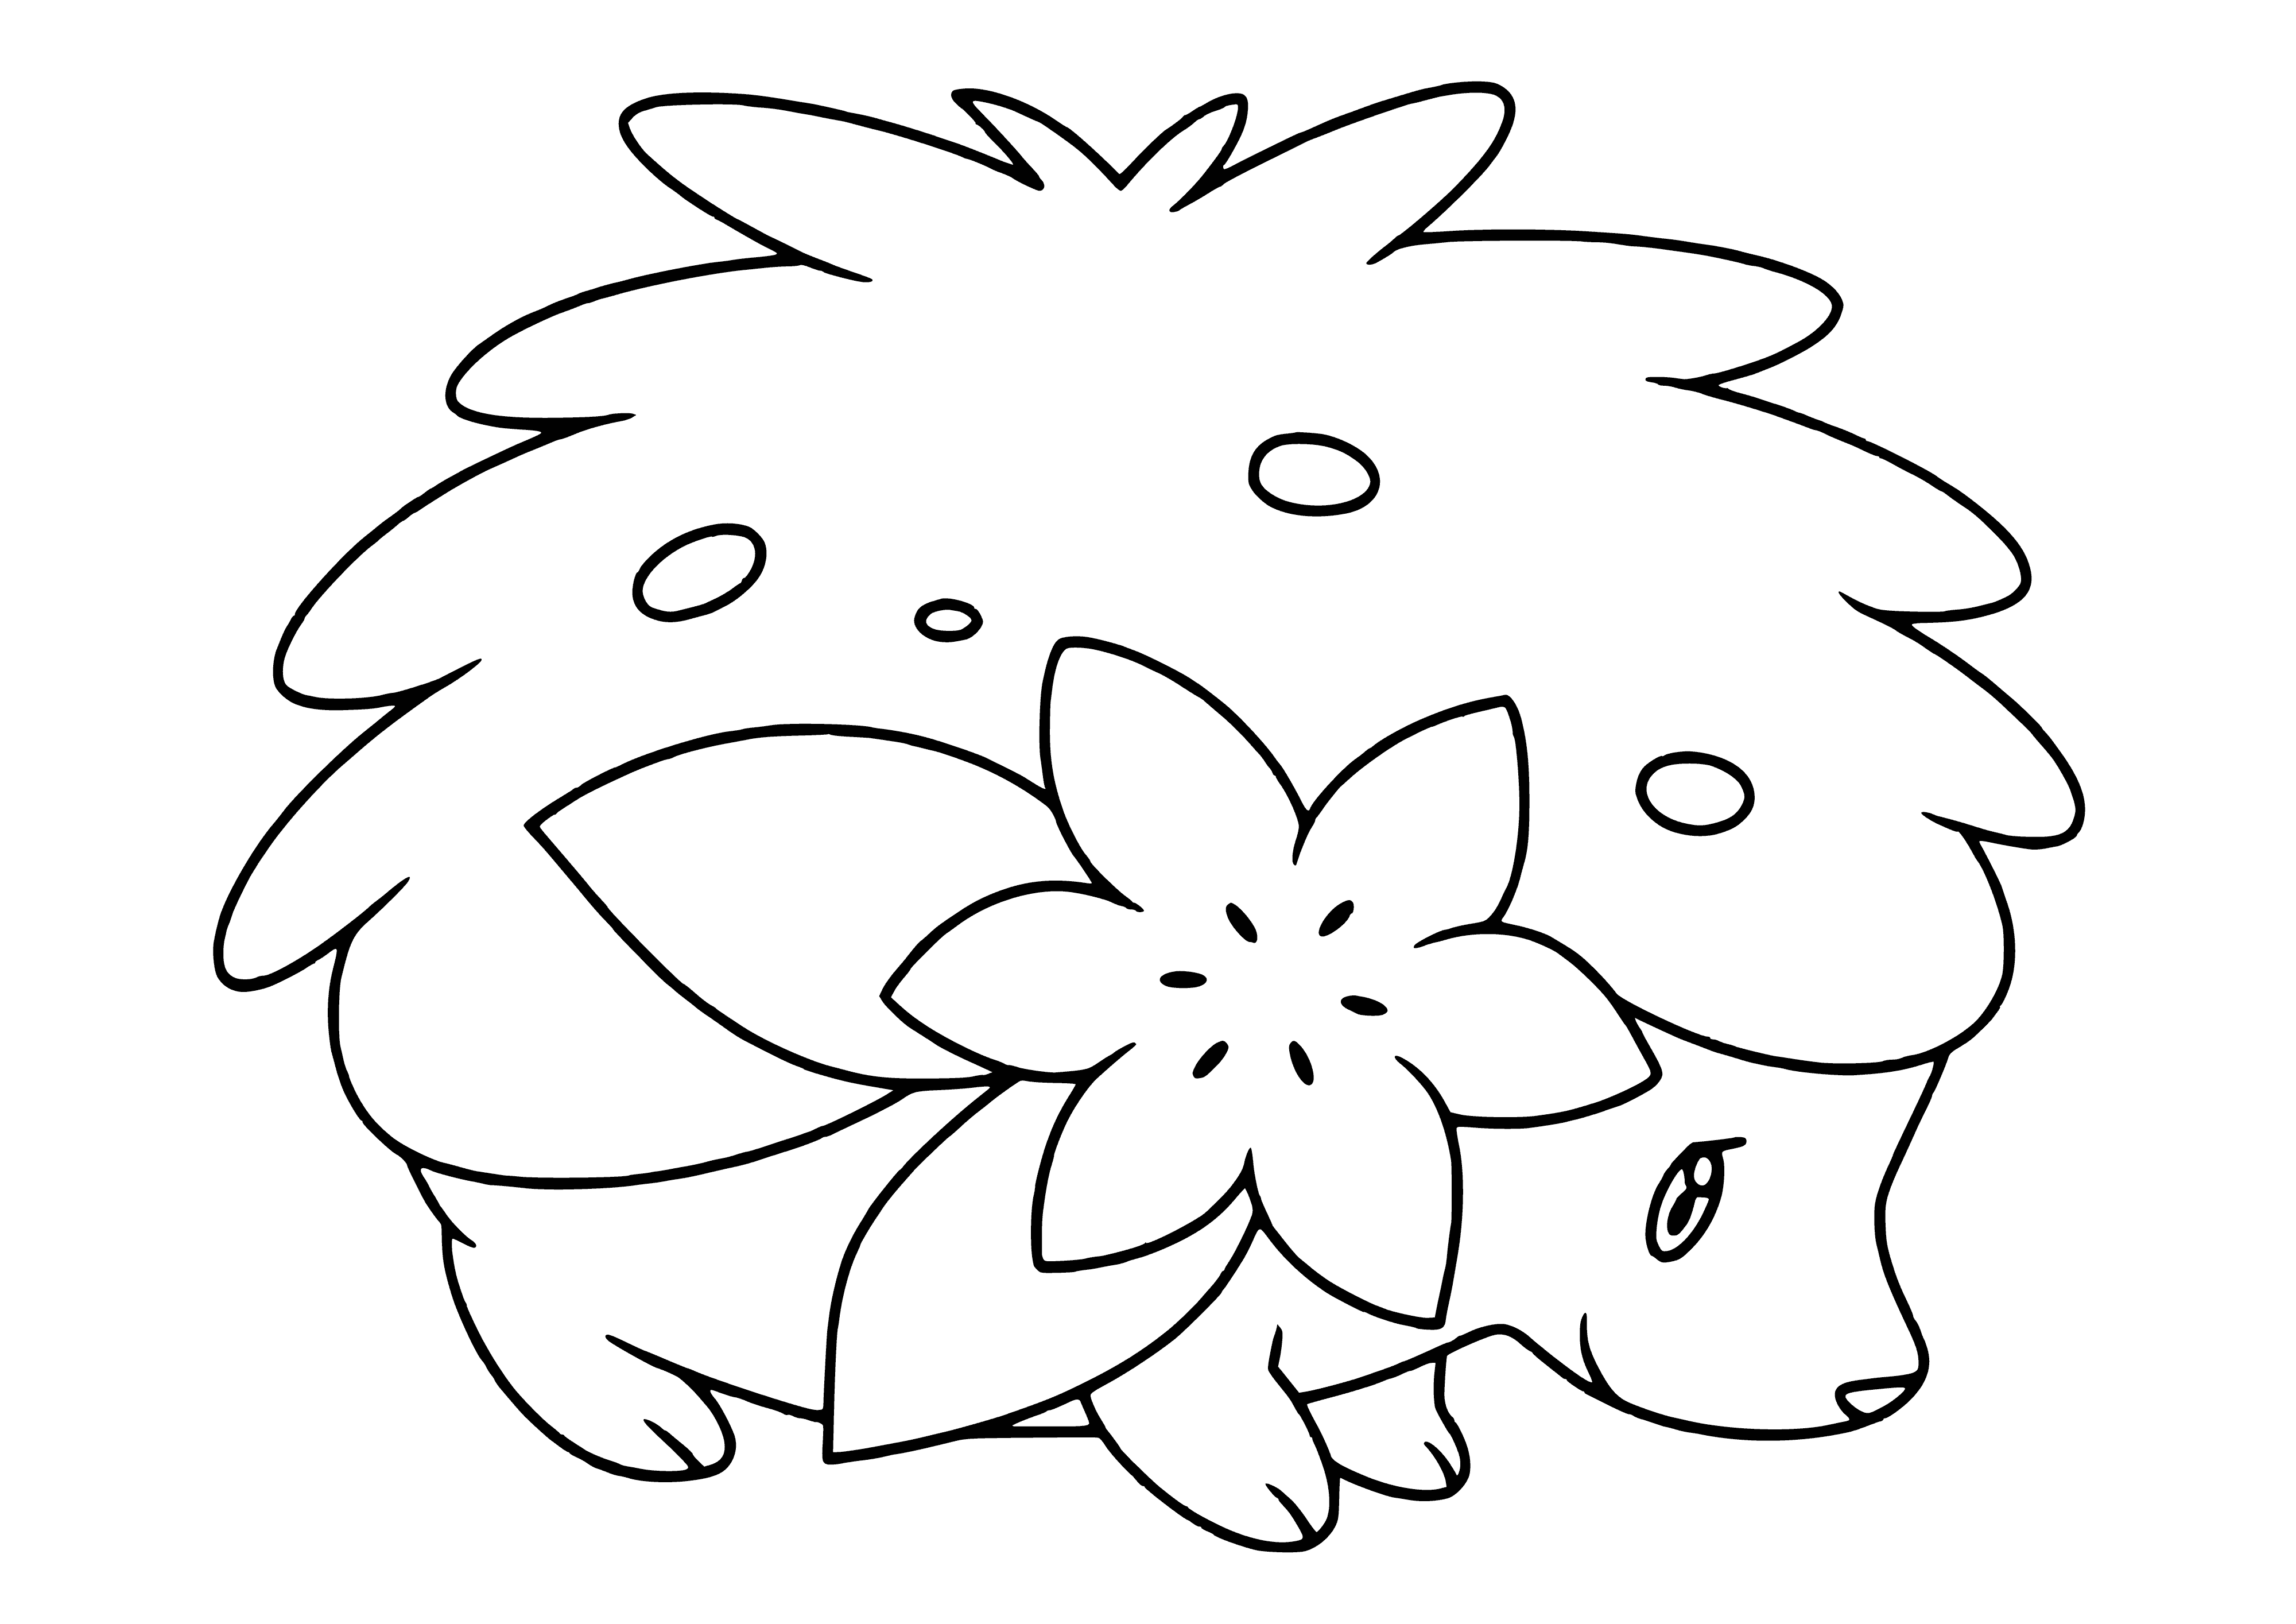 coloring page: Shaymin is a small, grass type Pokemon with white collar, red bowtie and 3 leaves on its head; blue eyes, small wings and two grass tufts on its back.